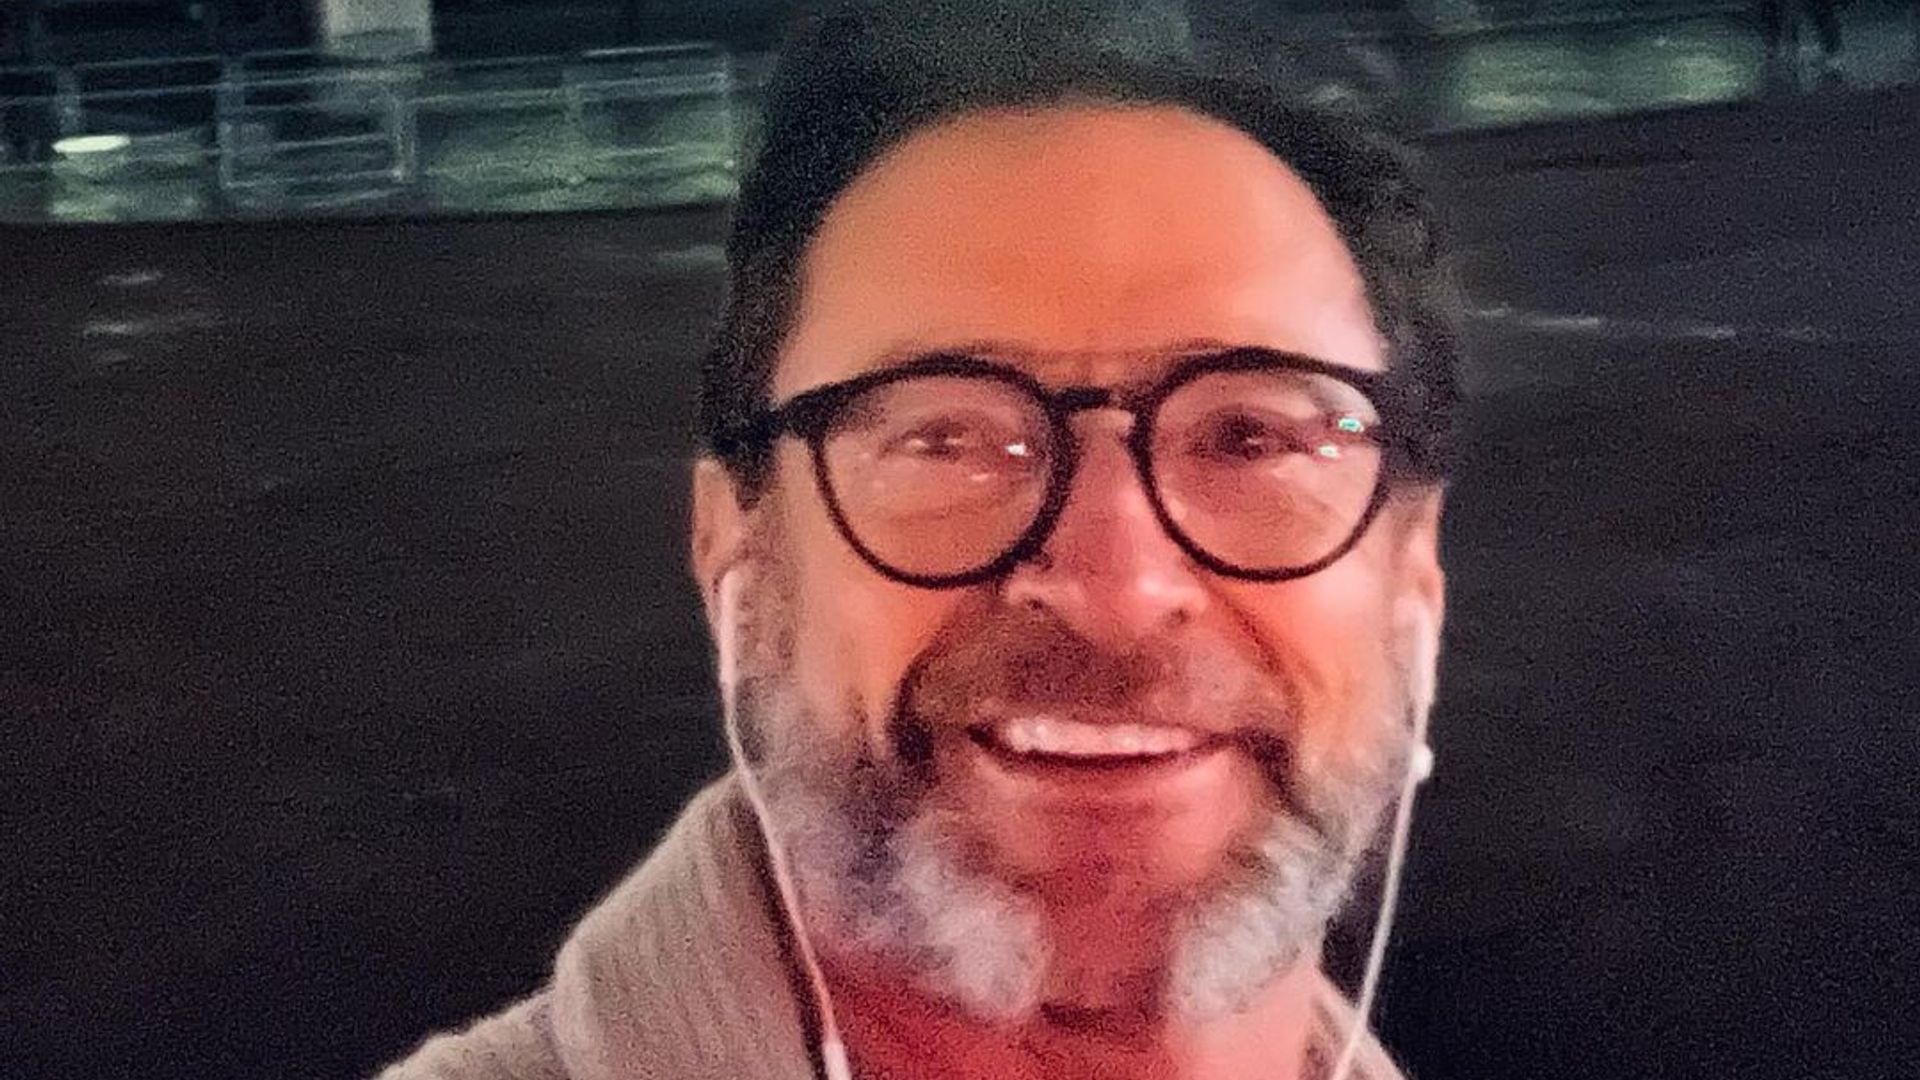 Hugh Jackman showcases his new sideburns after arriving in London in a photo shared on Instagram